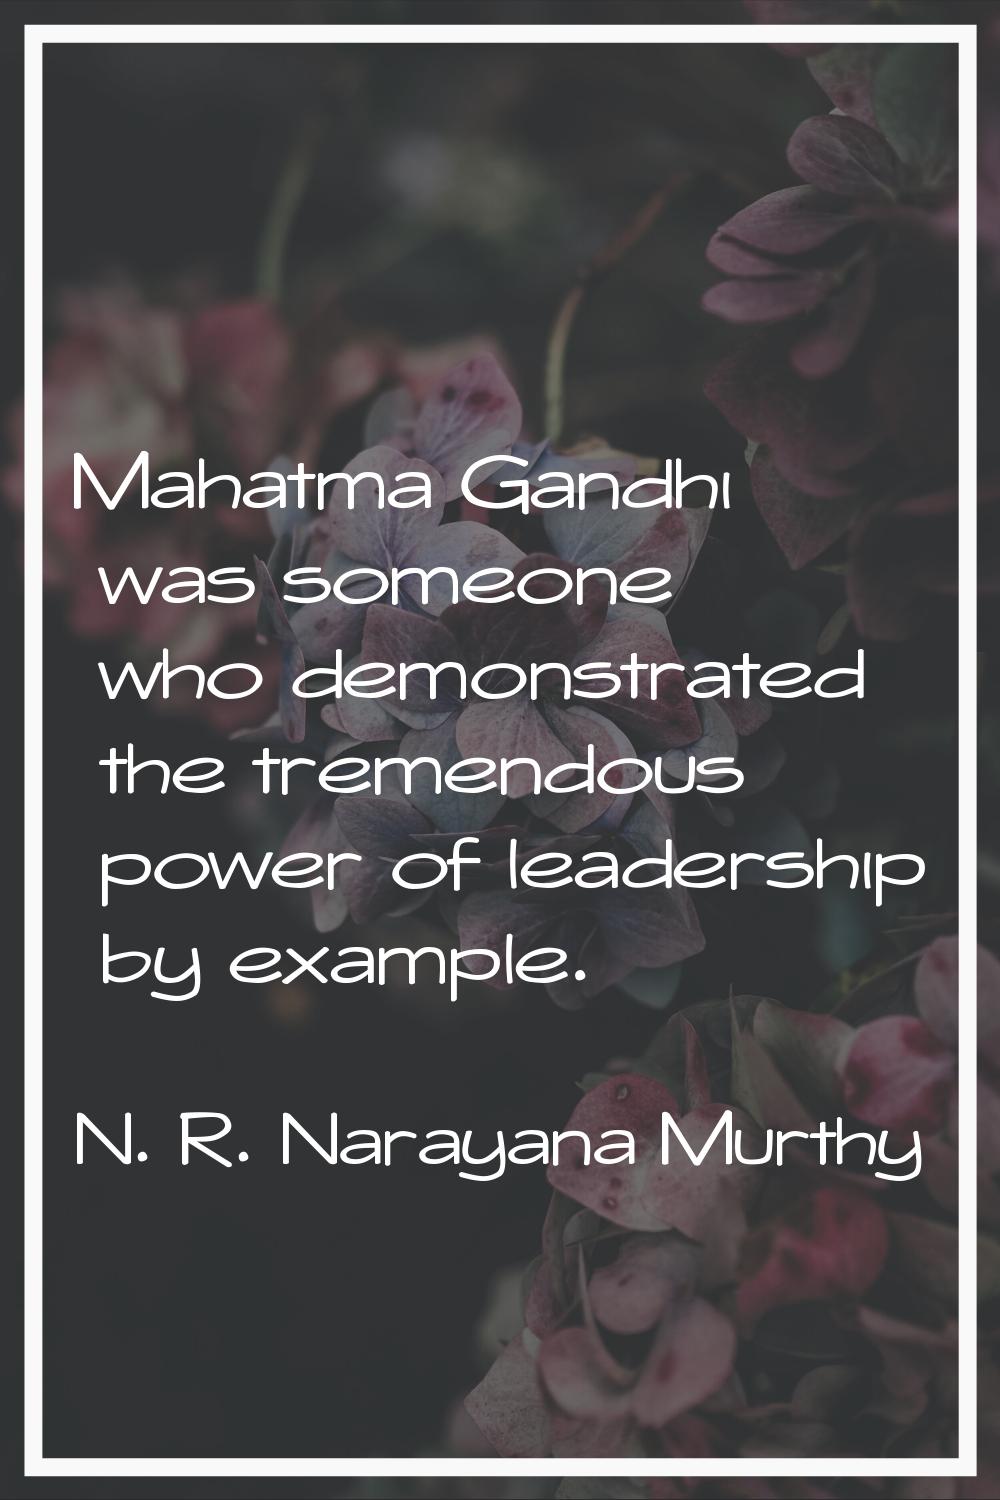 Mahatma Gandhi was someone who demonstrated the tremendous power of leadership by example.